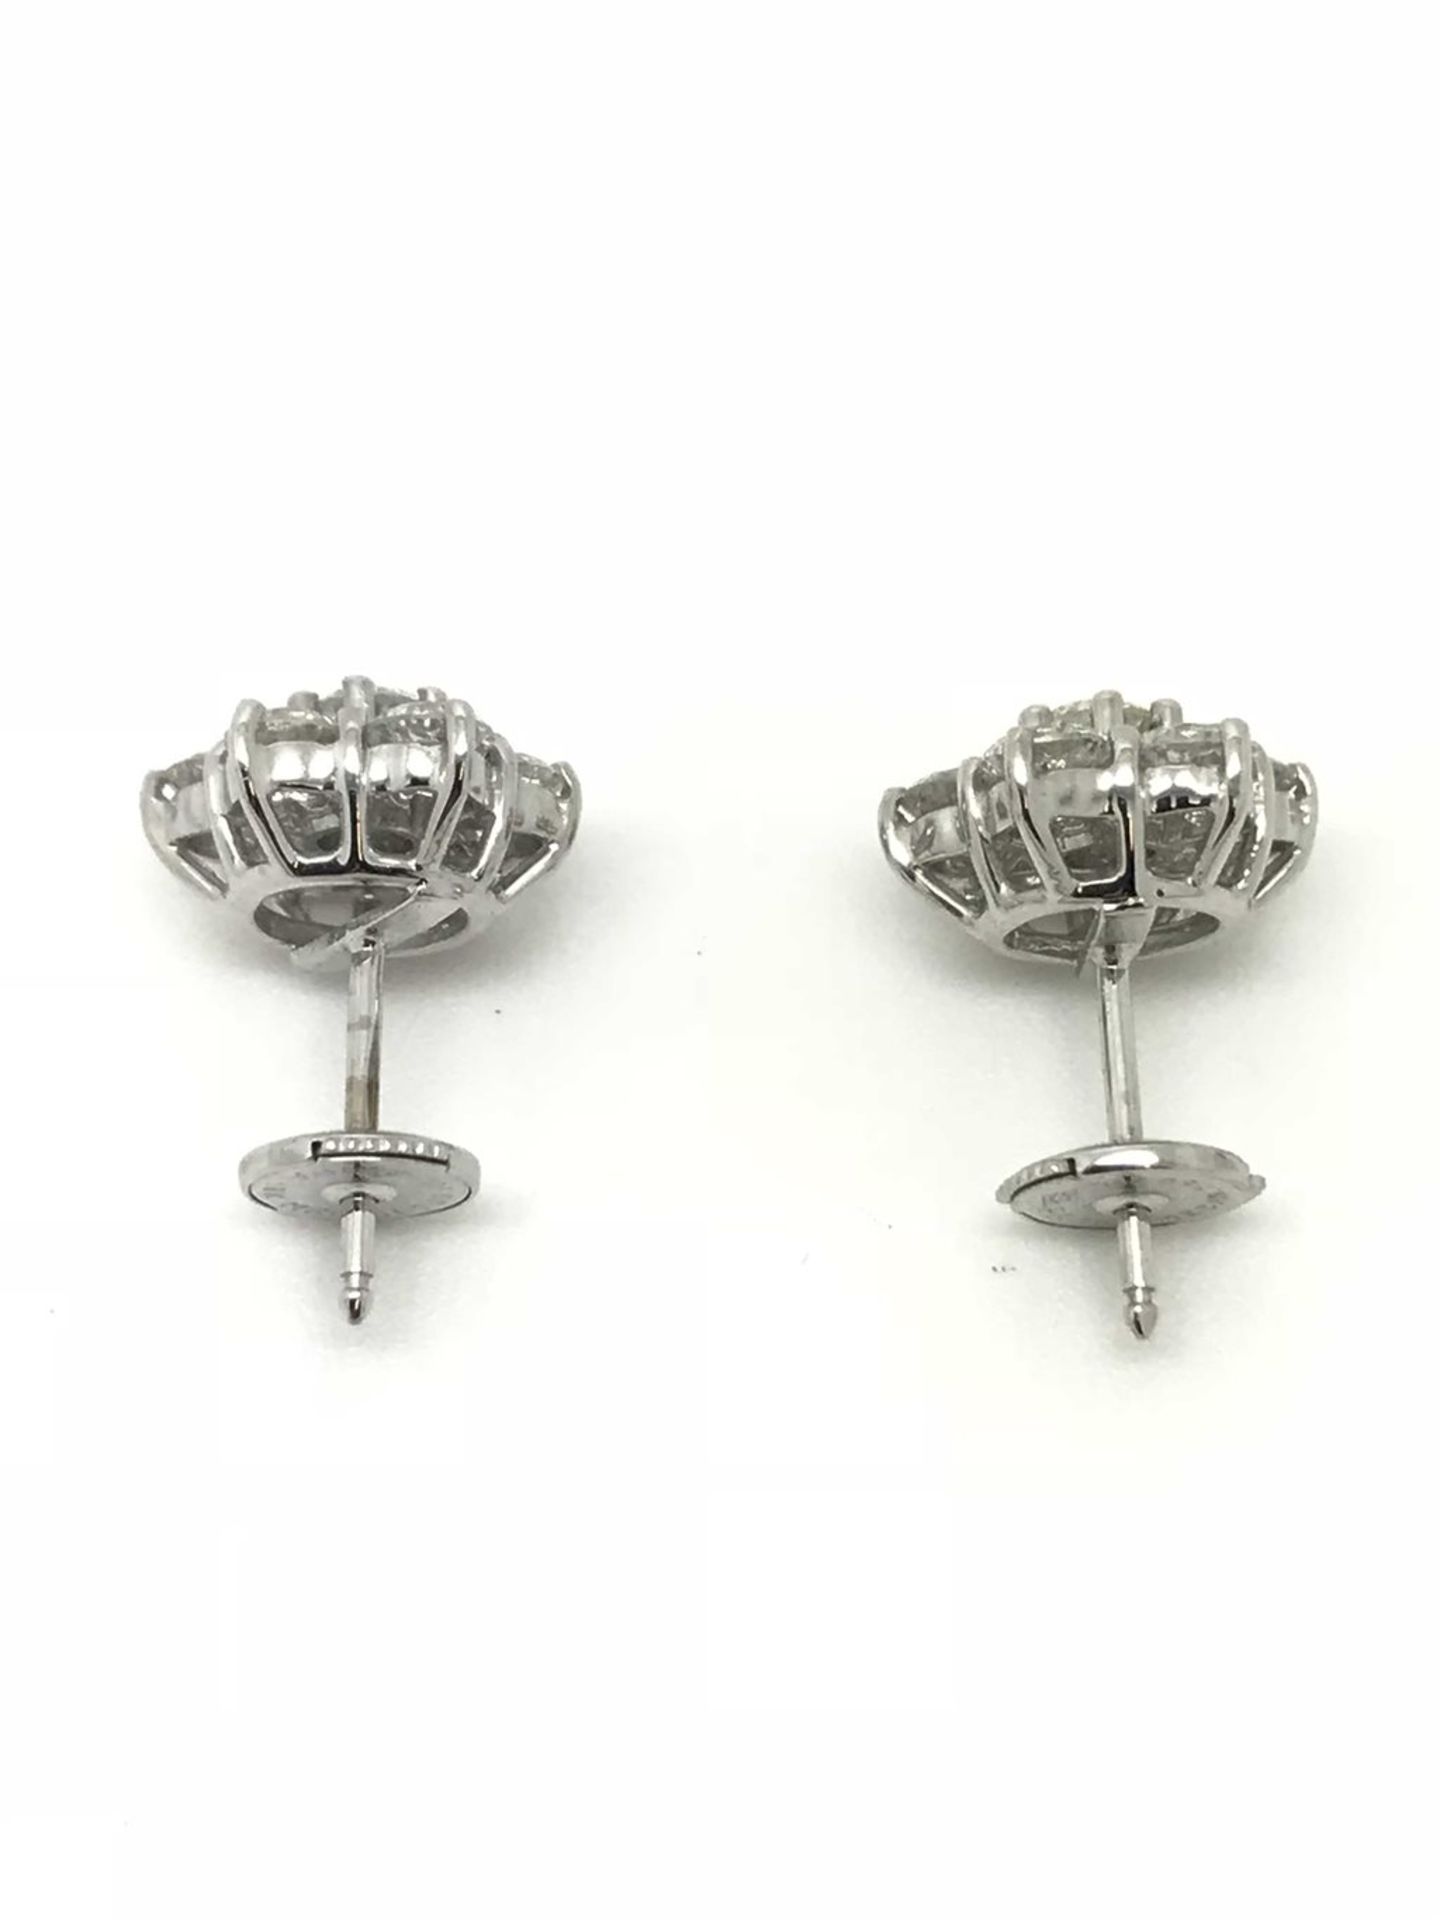 2ct Diamond Cluster Earrings, 18ct White Gold - Image 3 of 5